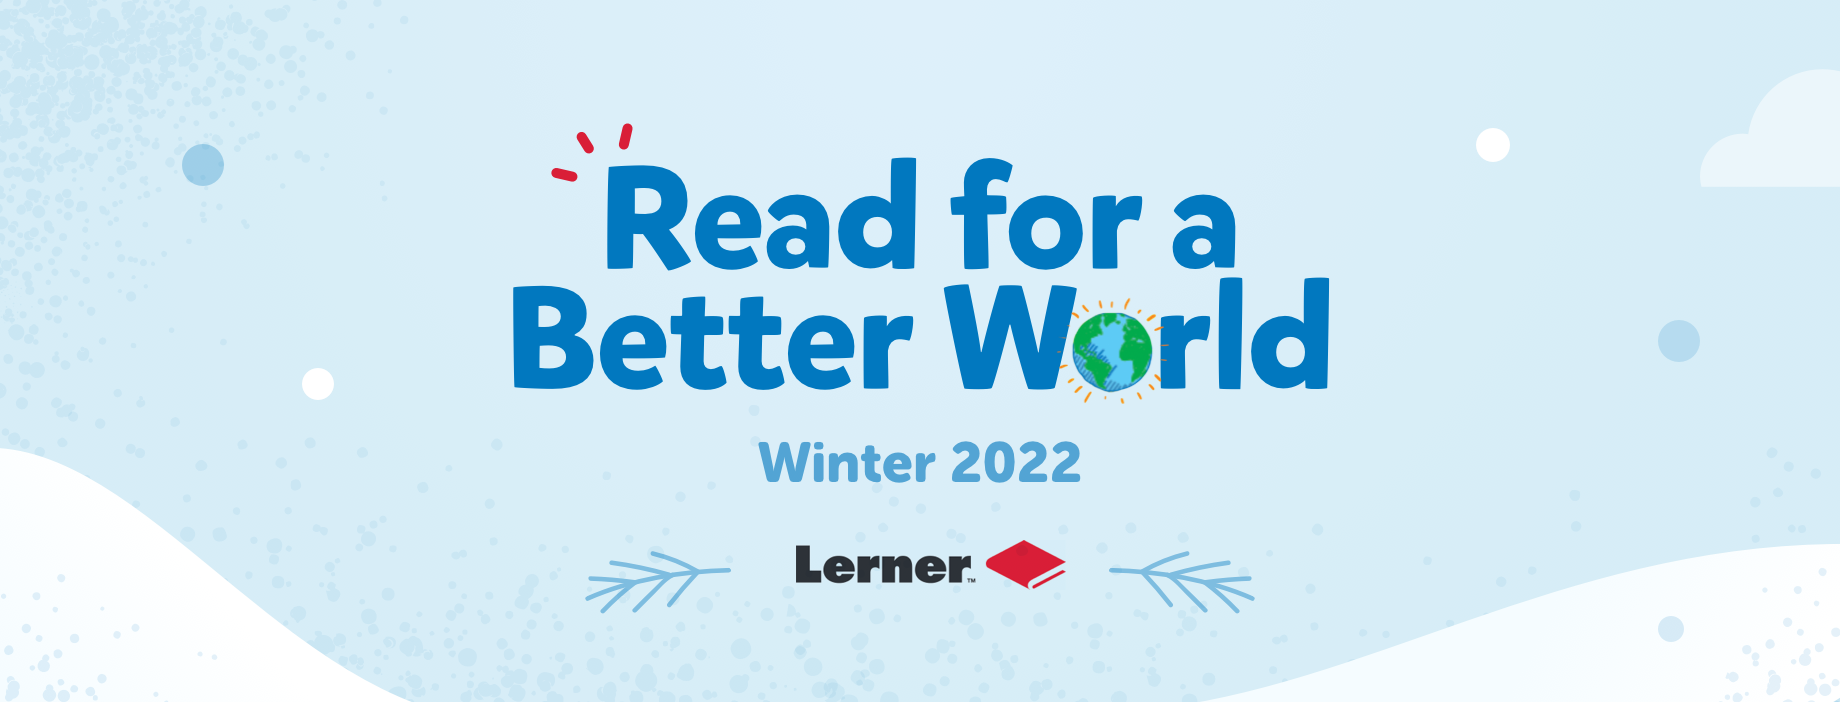 Winter_2022_Banner.png